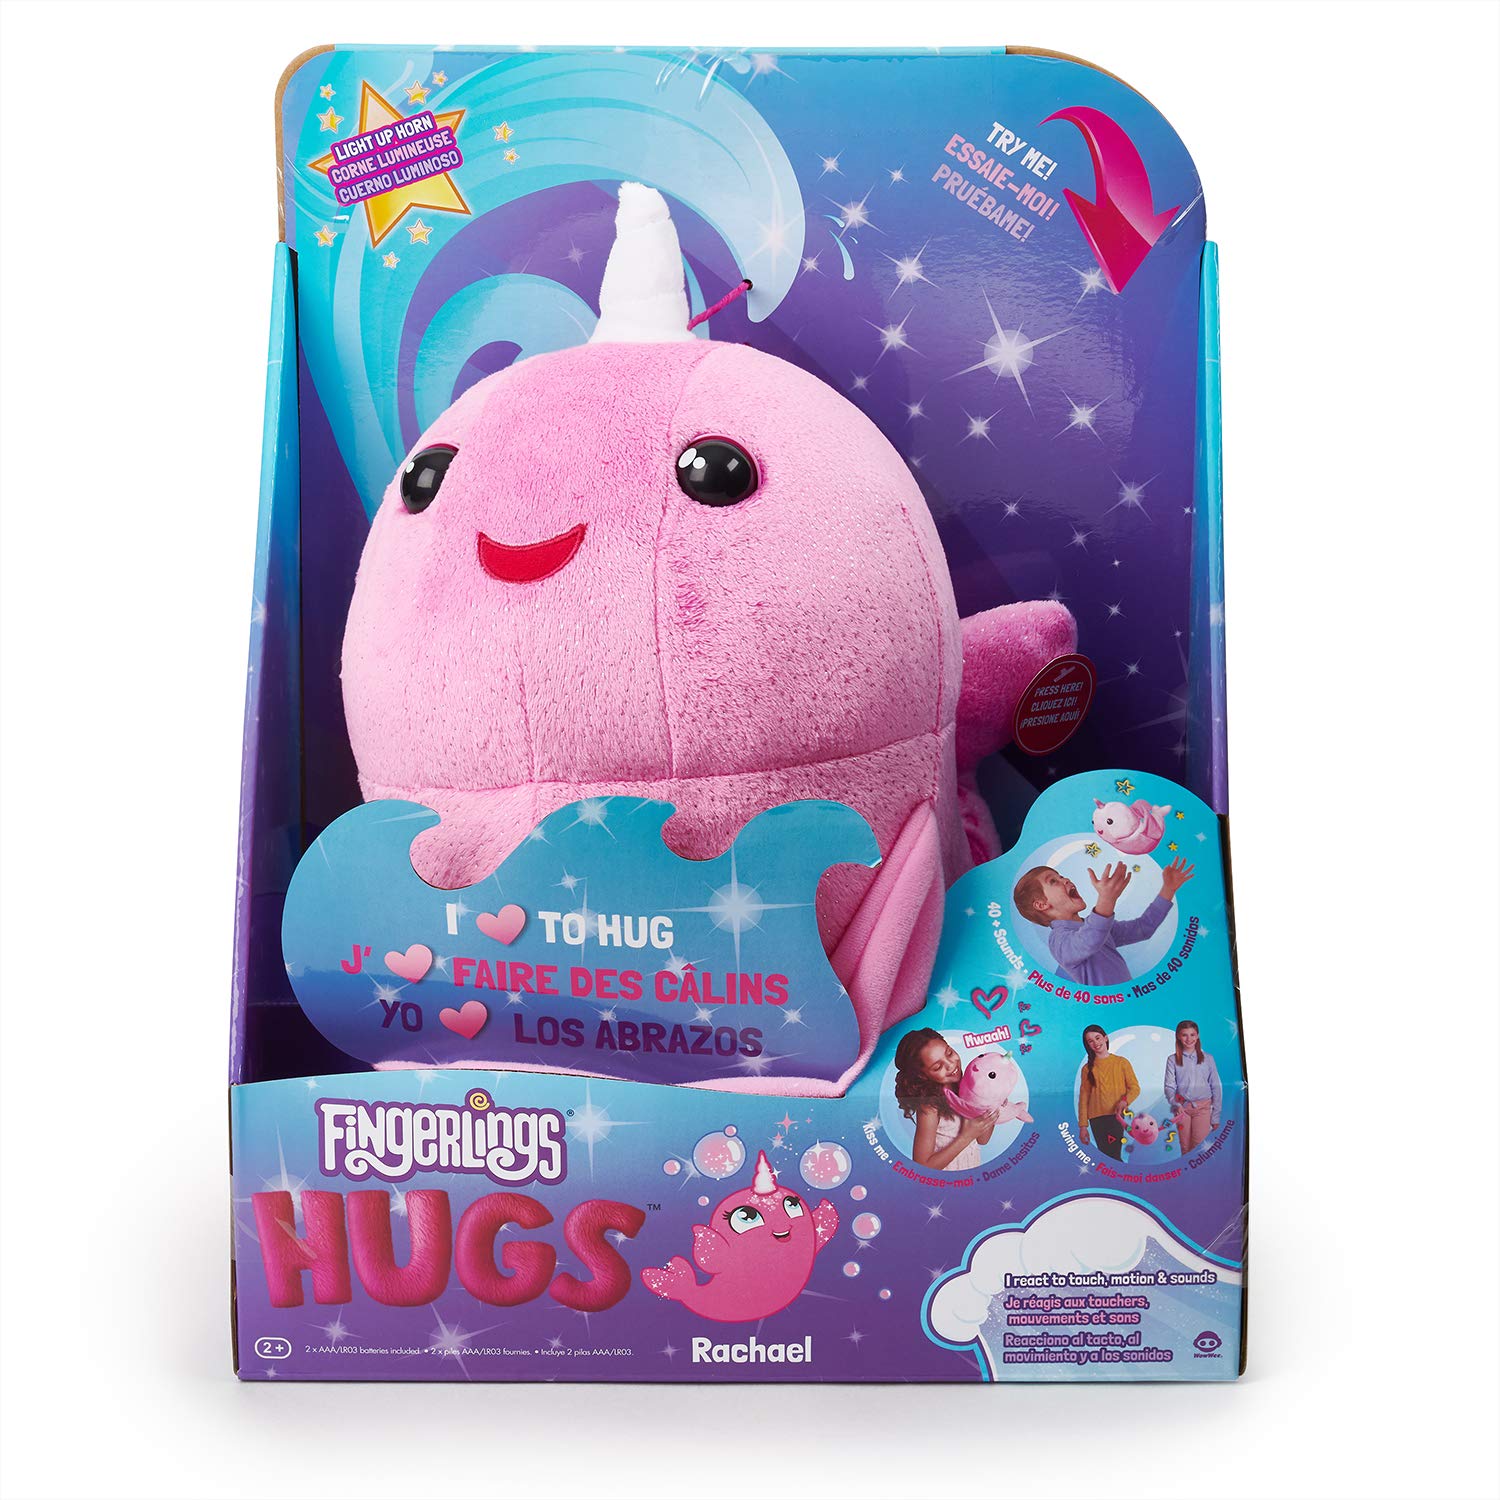 Wow Wee Fingerlings Hugs Friend Rachael pink narwhal plush whale light up horn